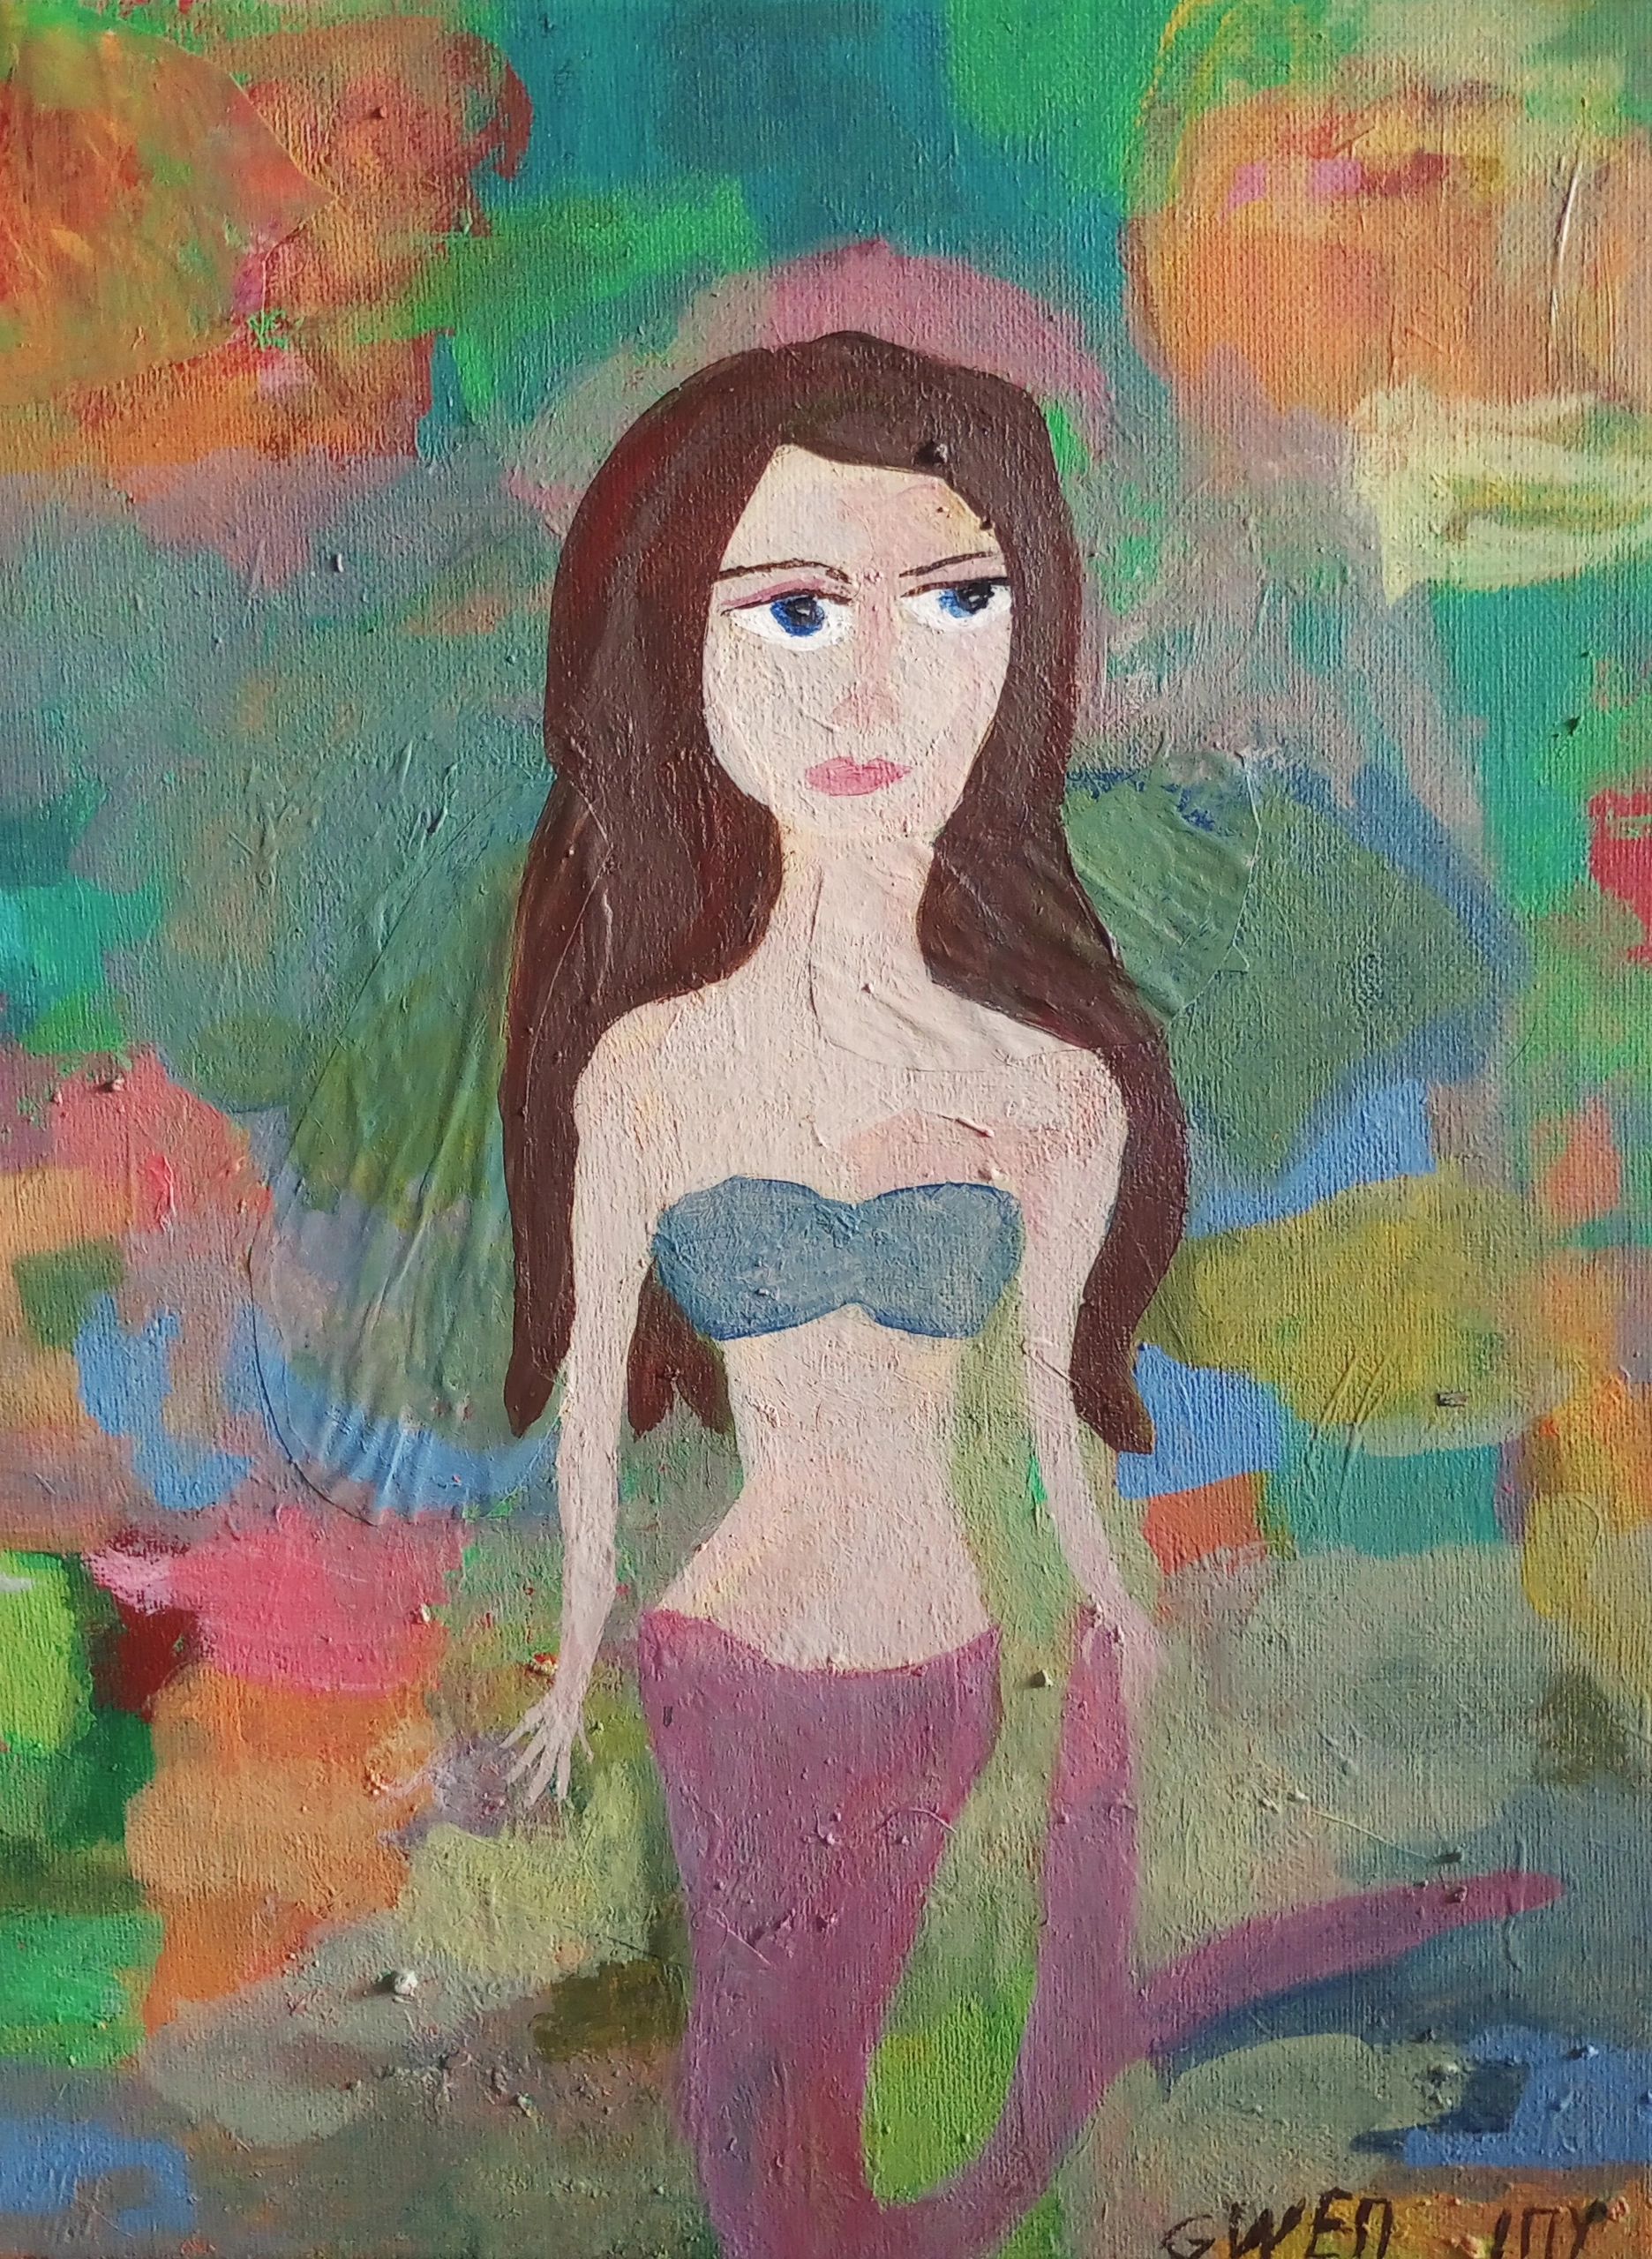 "Janelle the Mermaid" is 10 x 12 acrylic on canvas. I accept Paypal and Venmo payments. $145.